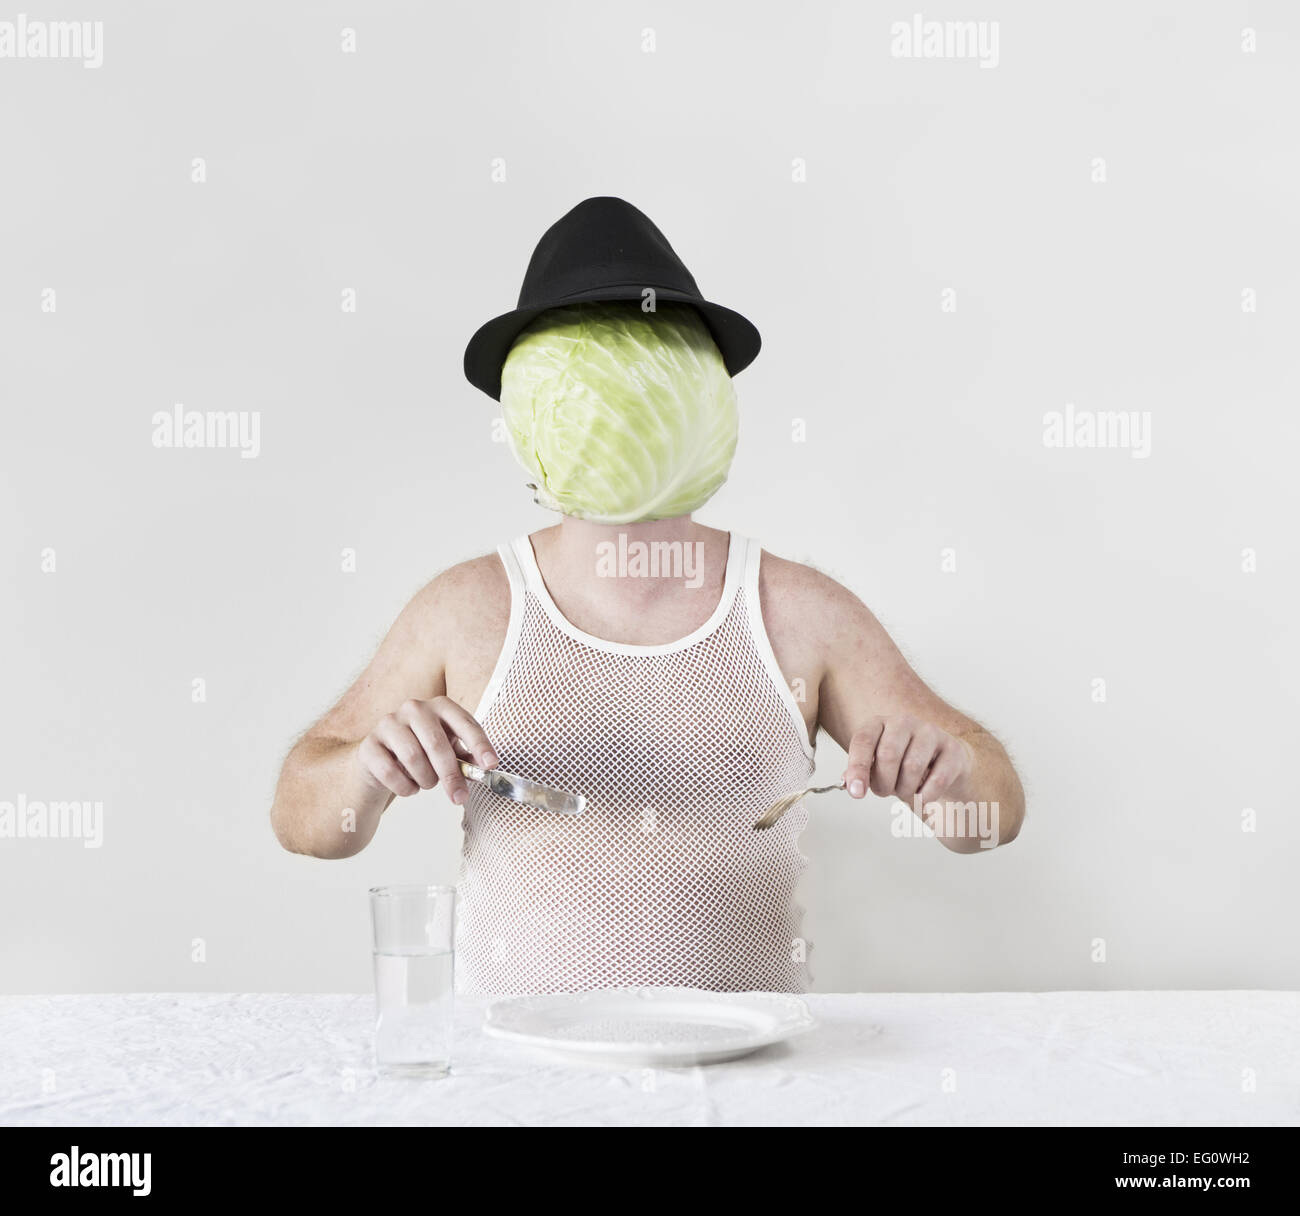 Wierd cabbage man with hat and nothing on the plate. Stock Photo